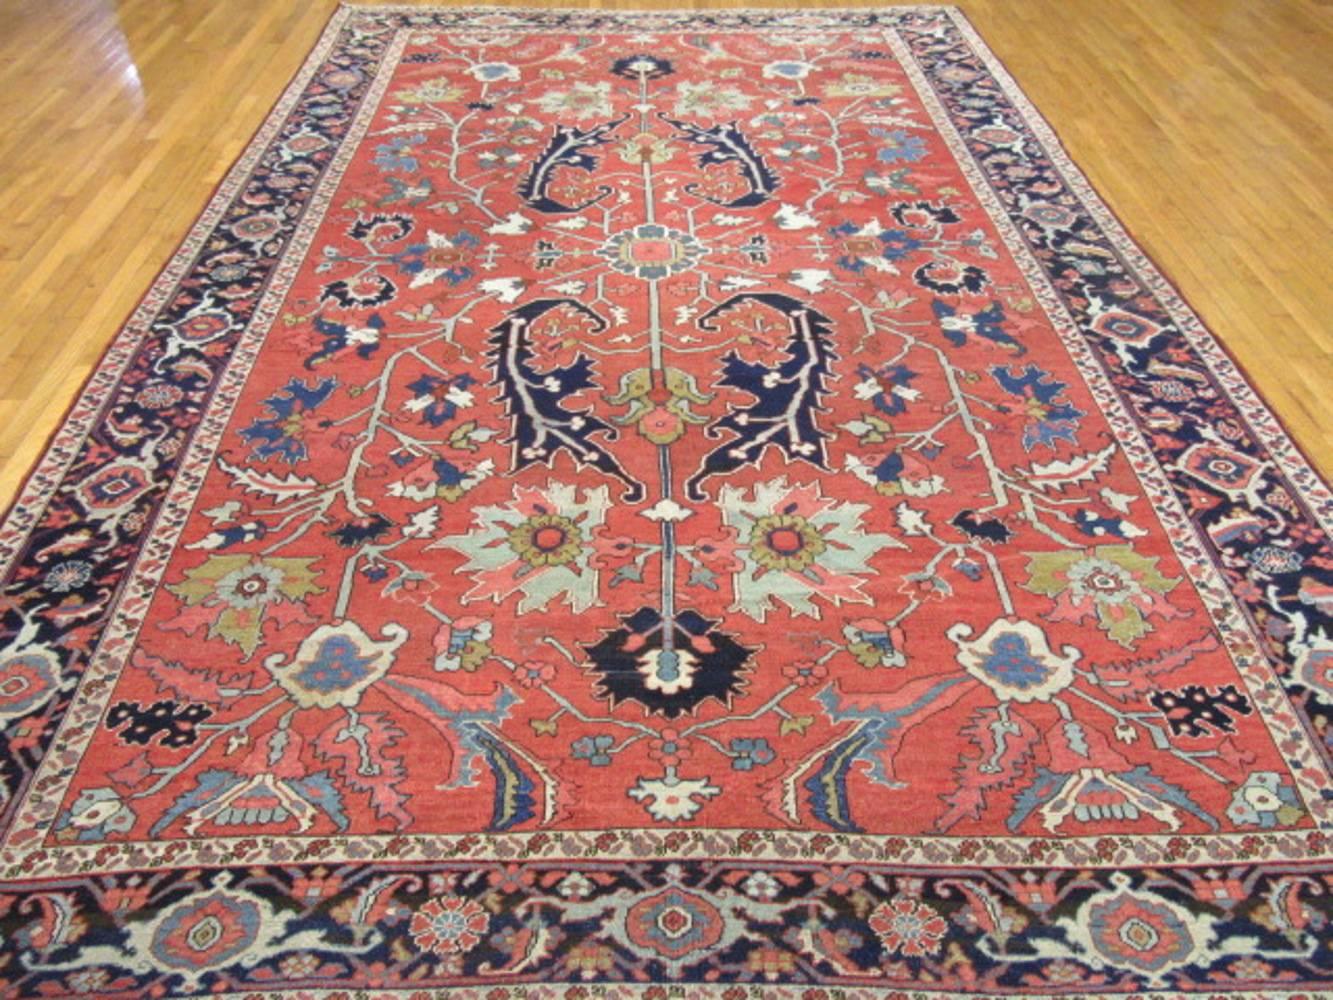 This is a large room size hand-knotted antique Persian Serapi rug with a rather all-over pattern design which provides flexibility with placement perfect for any room in your house or office. The rug has a fine weave not common in these type of